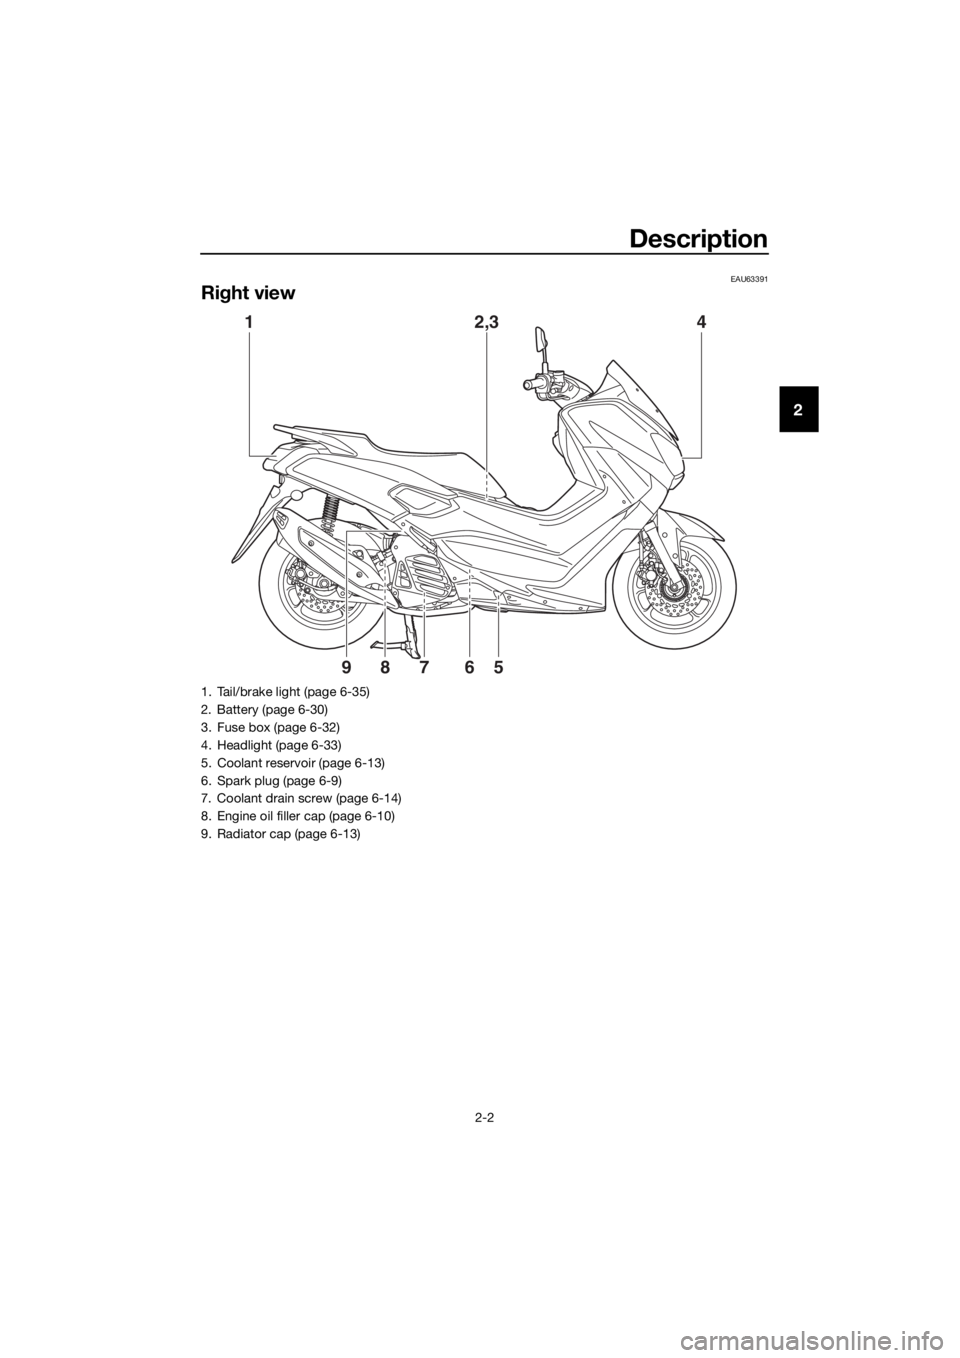 YAMAHA NMAX 150 2018  Owners Manual Description
2-2
2
EAU63391
Right view
1 2,34
567
89
1. Tail/brake light (page 6-35)
2. Battery (page 6-30)
3. Fuse box (page 6-32)
4. Headlight (page 6-33)
5. Coolant reservoir (page 6-13)
6. Spark pl